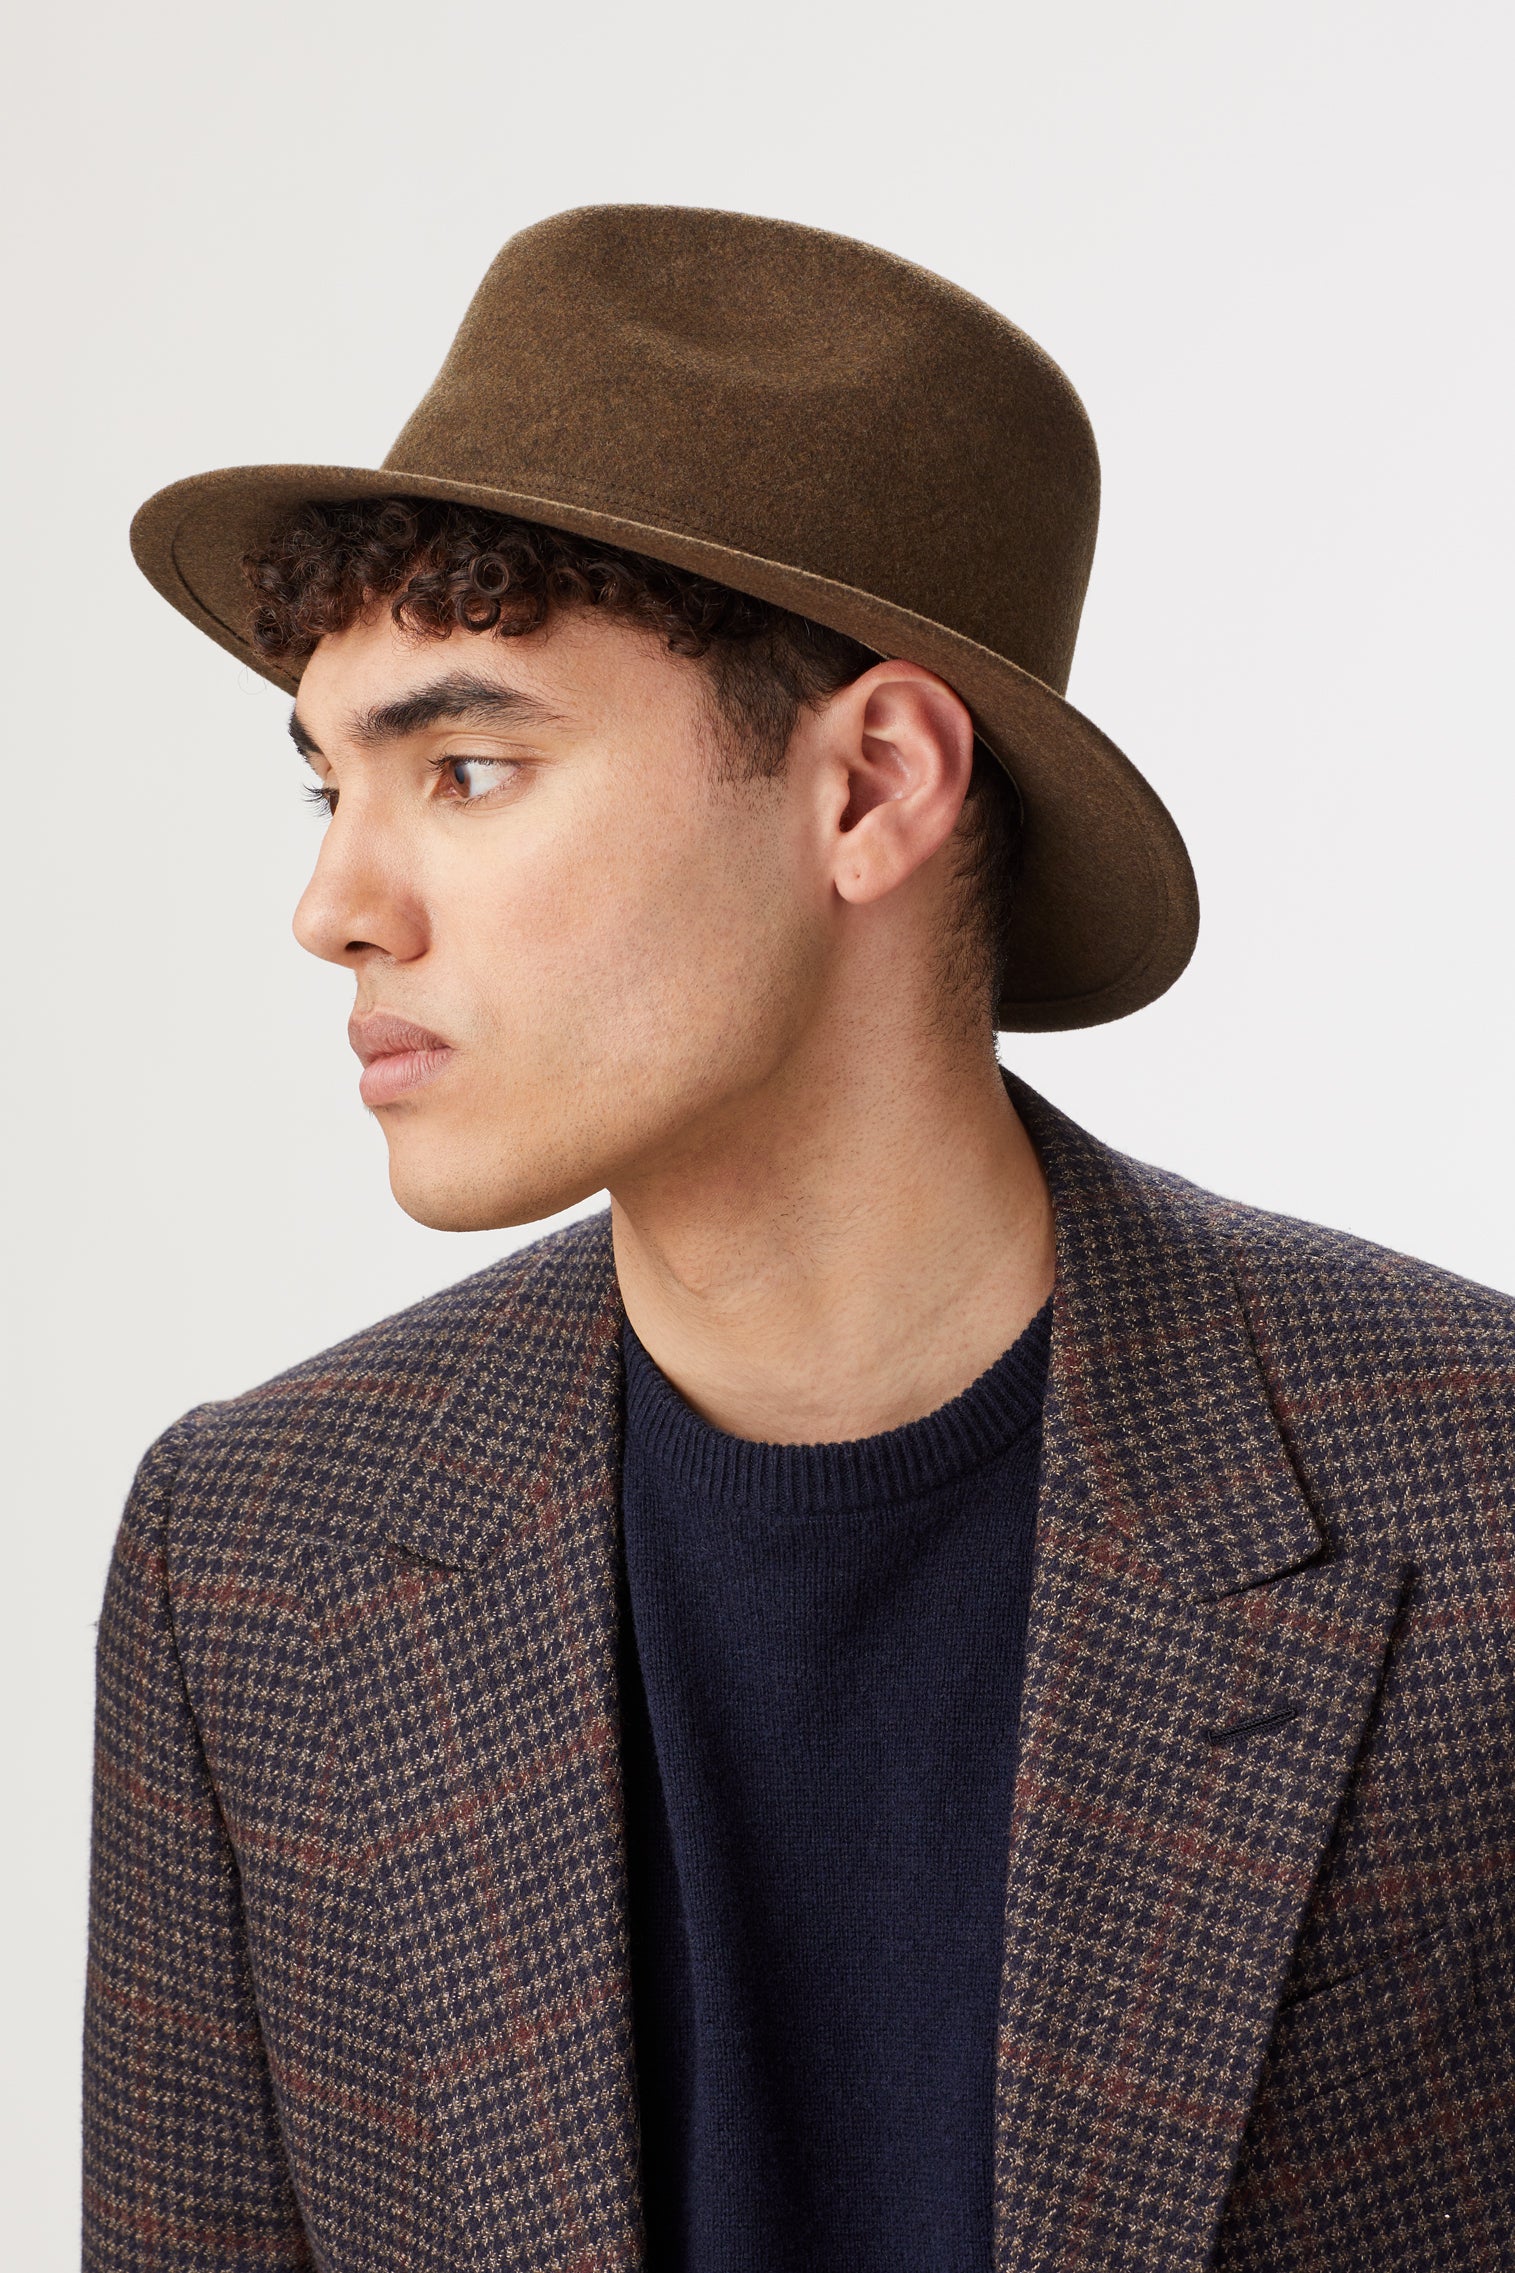 Rambler Rollable Trilby - Hats for Tall People - Lock & Co. Hatters London UK